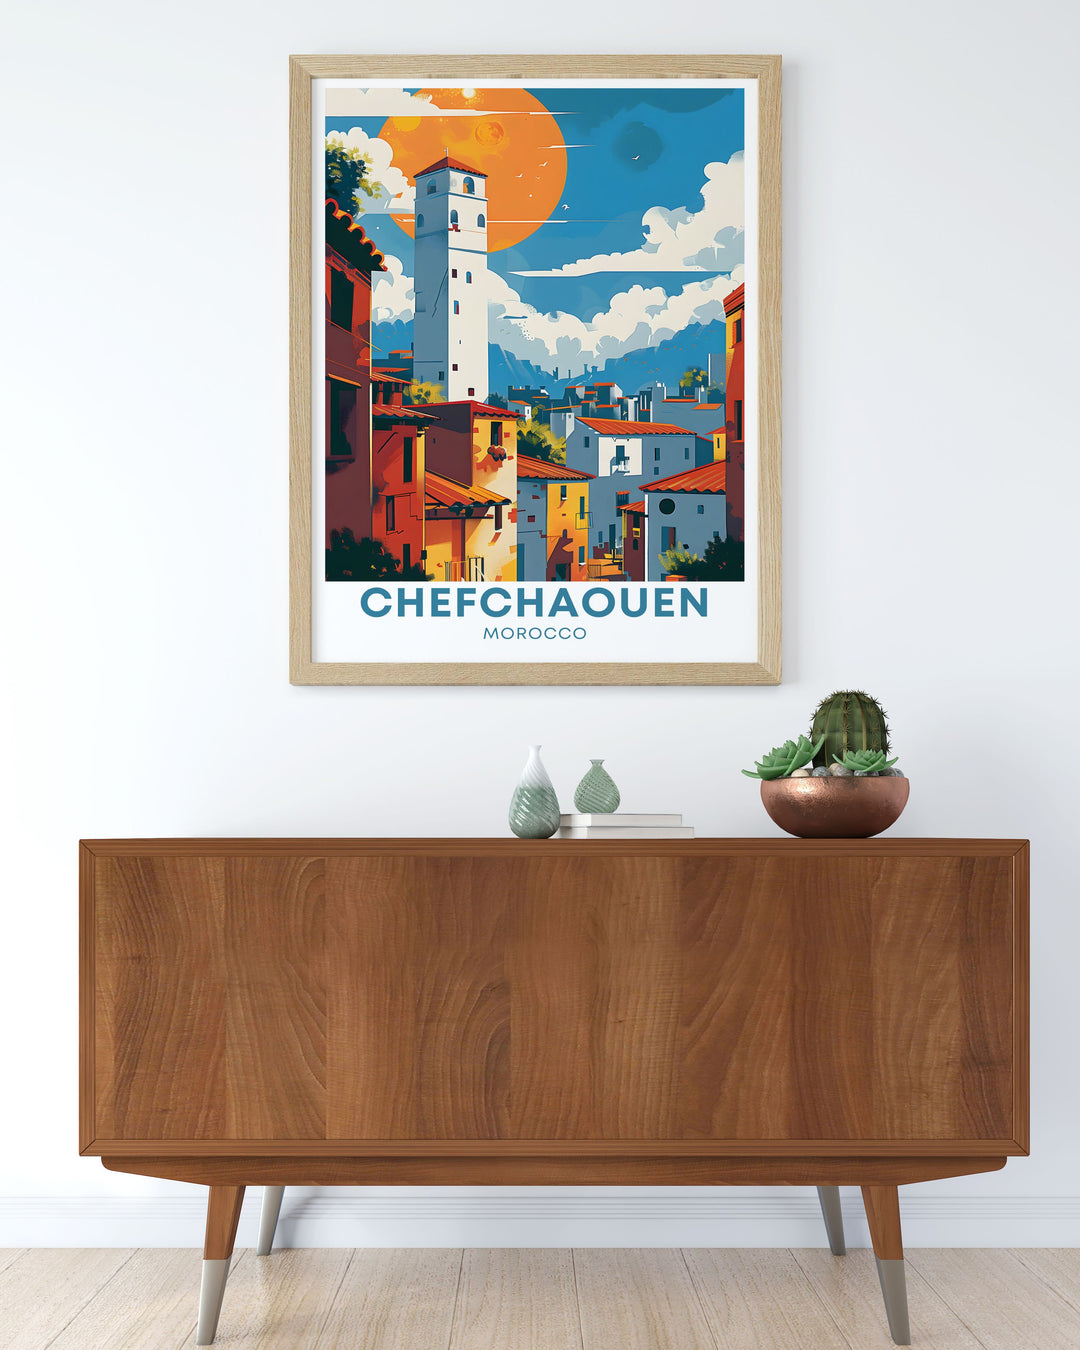 This Chefchaouen travel poster beautifully captures the vibrant blue hues and historical charm of the Blue Medina. Perfect for adding a serene and exotic touch to your decor, this art print reflects the unique architecture and cultural heritage of Moroccos Blue Pearl.